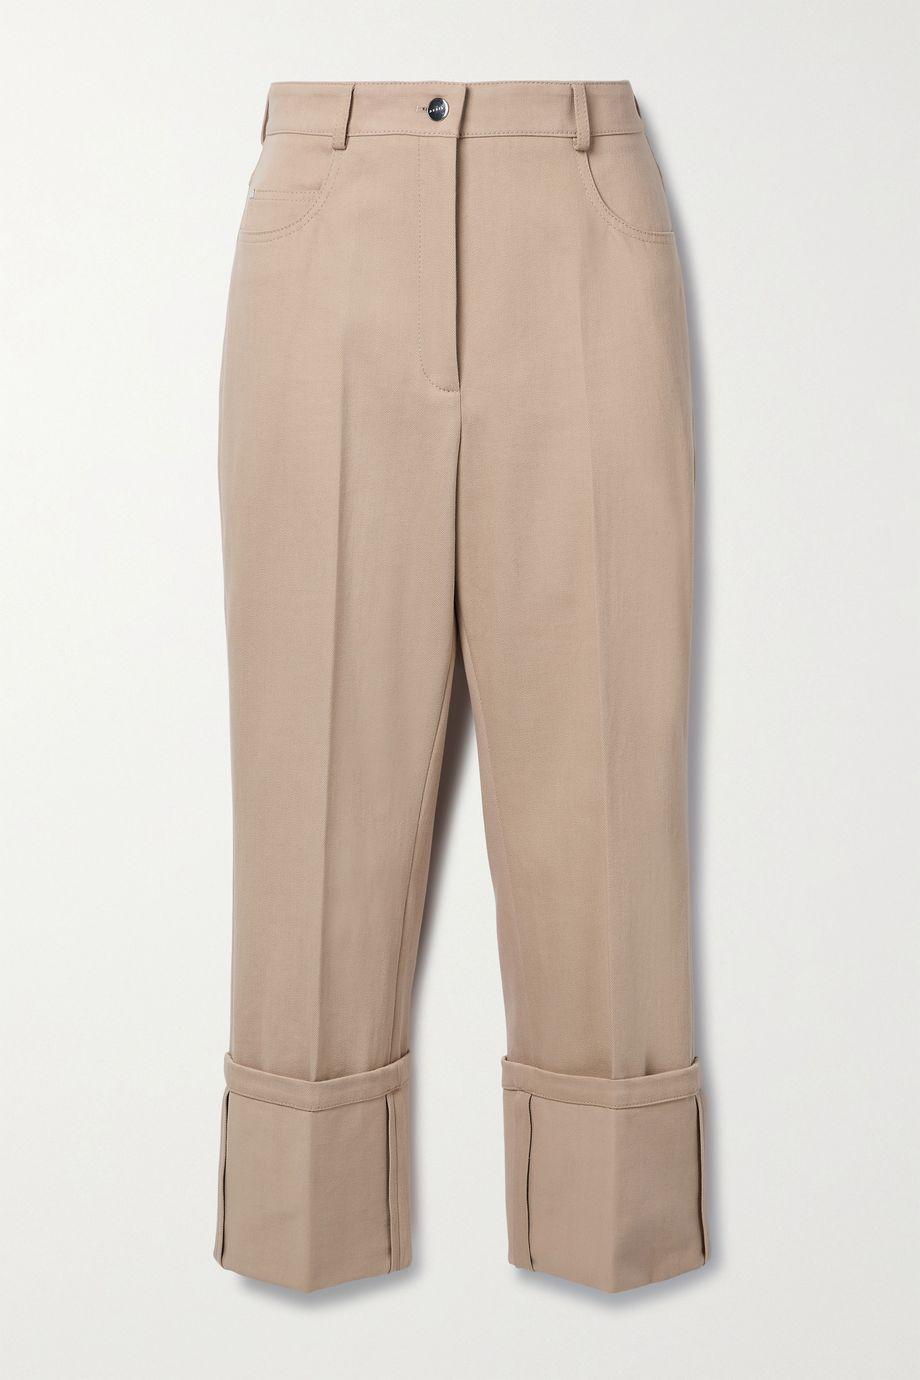 Floyd cropped cotton-blend twill tapered pants by AKRIS